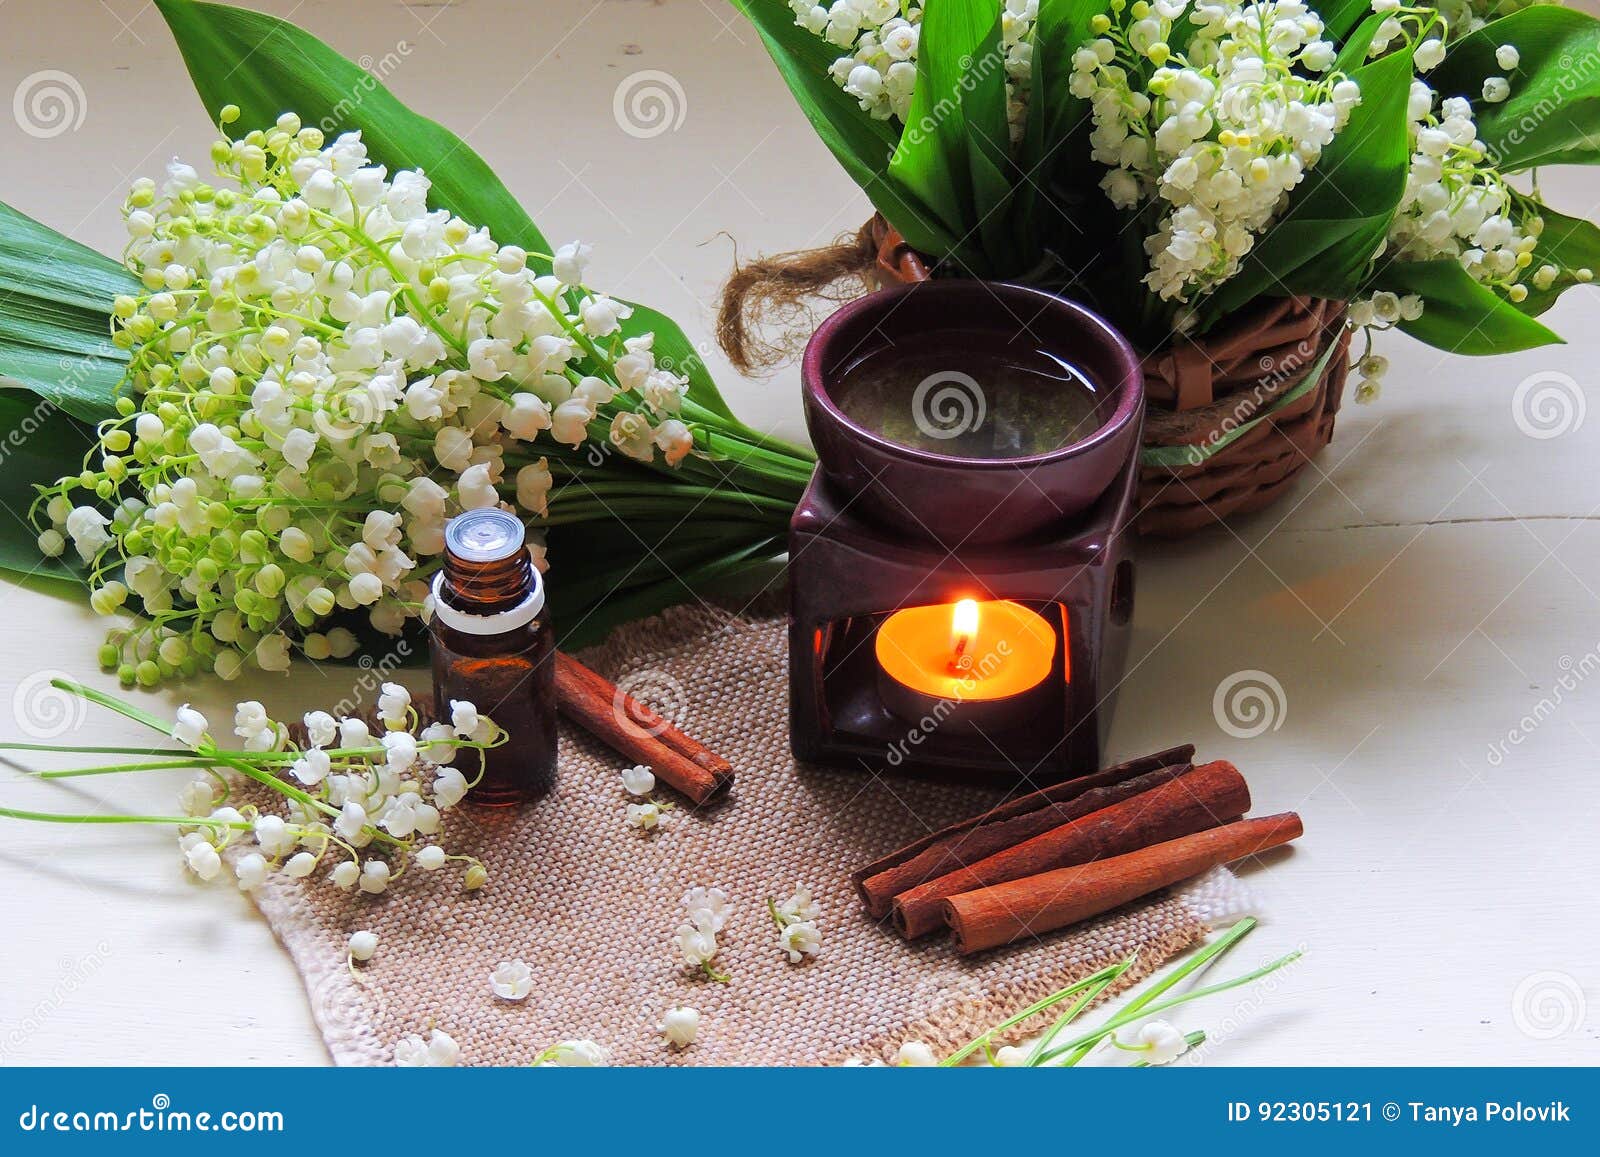 Essential Oil And Lily Of The Valley, Cinnamon On A Blue